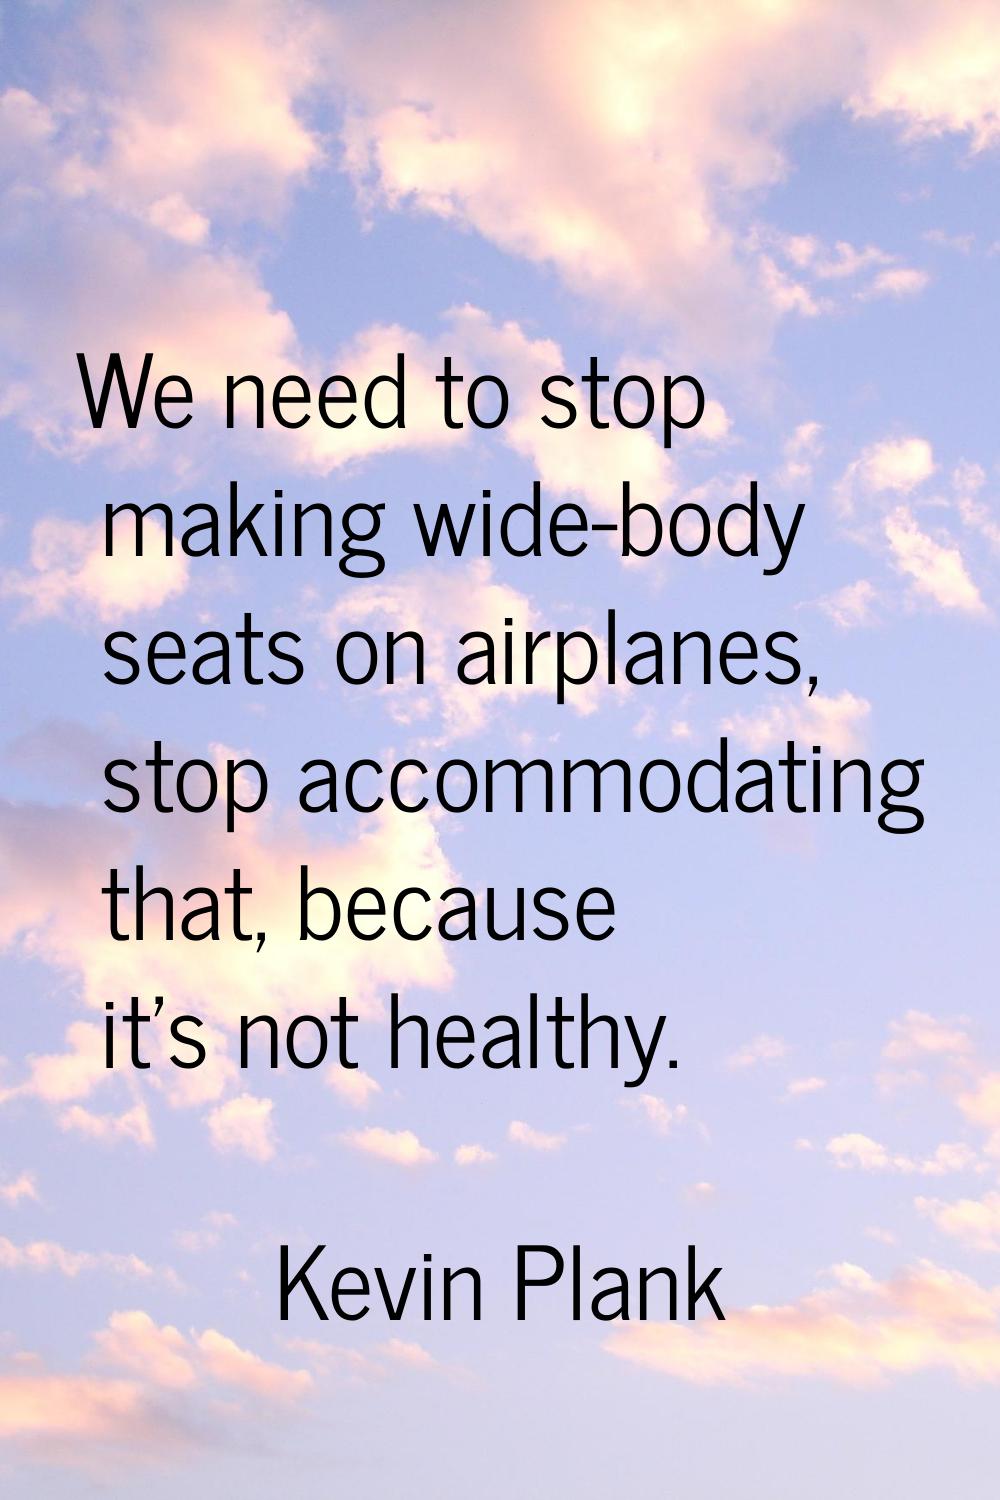 We need to stop making wide-body seats on airplanes, stop accommodating that, because it's not heal